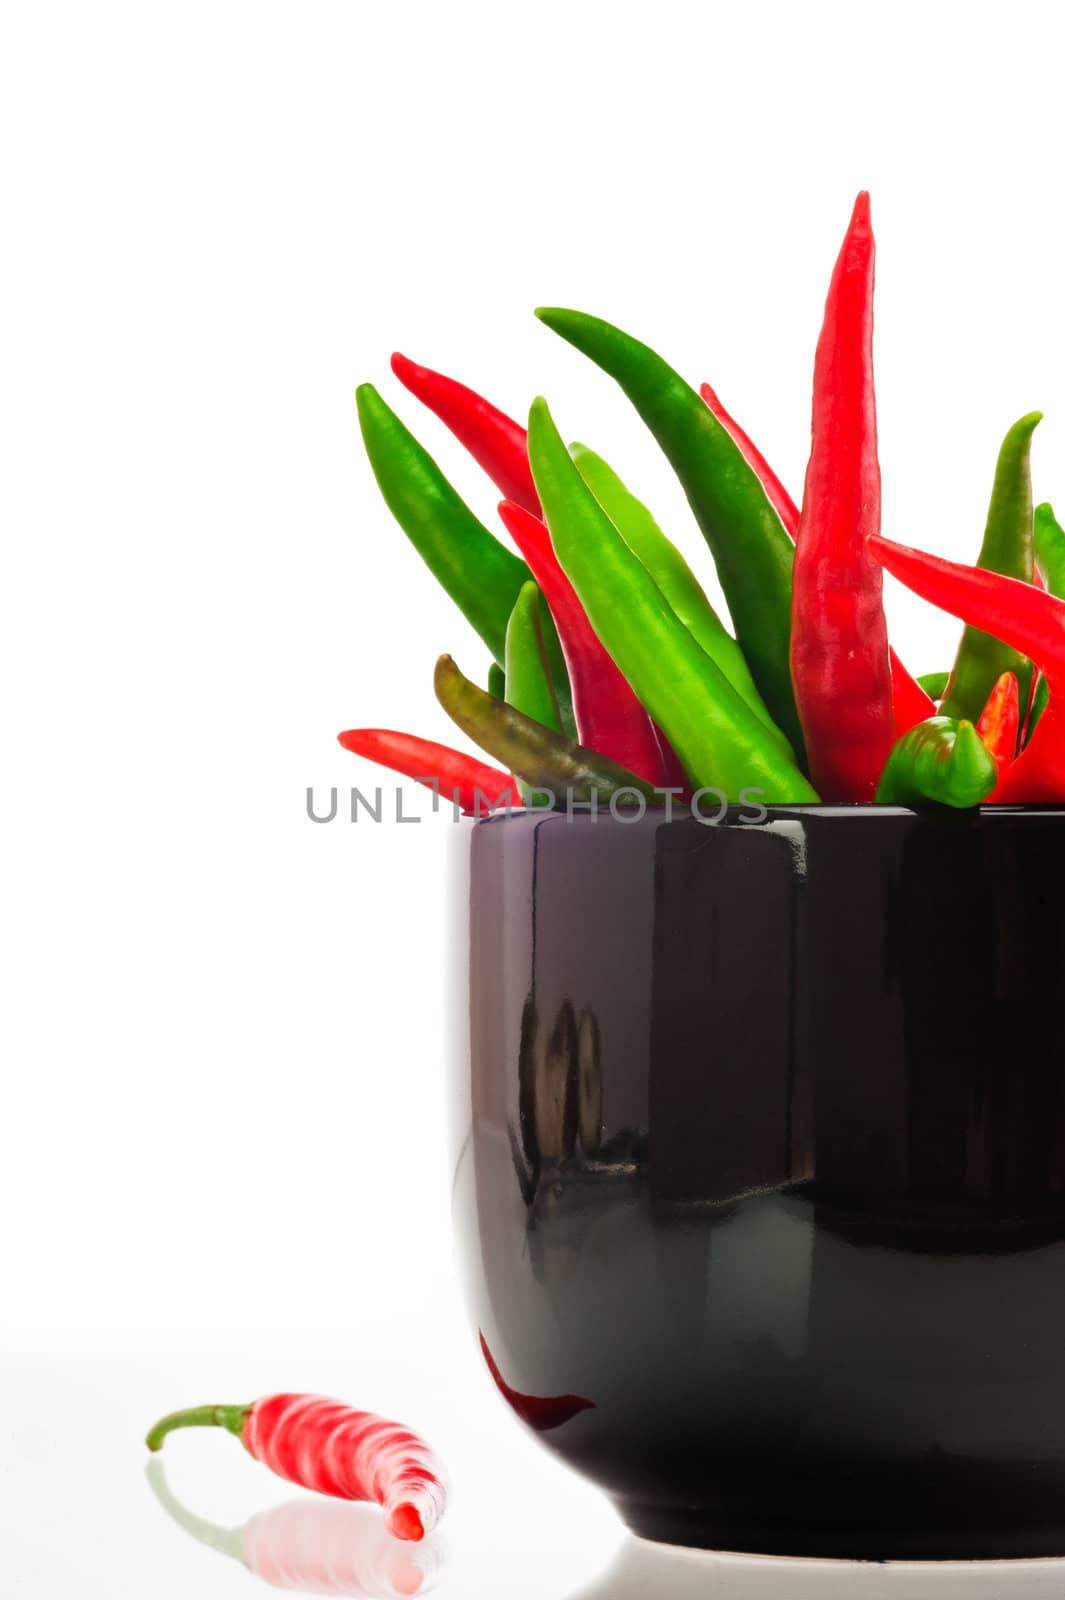 Chili in a bowl on a white background